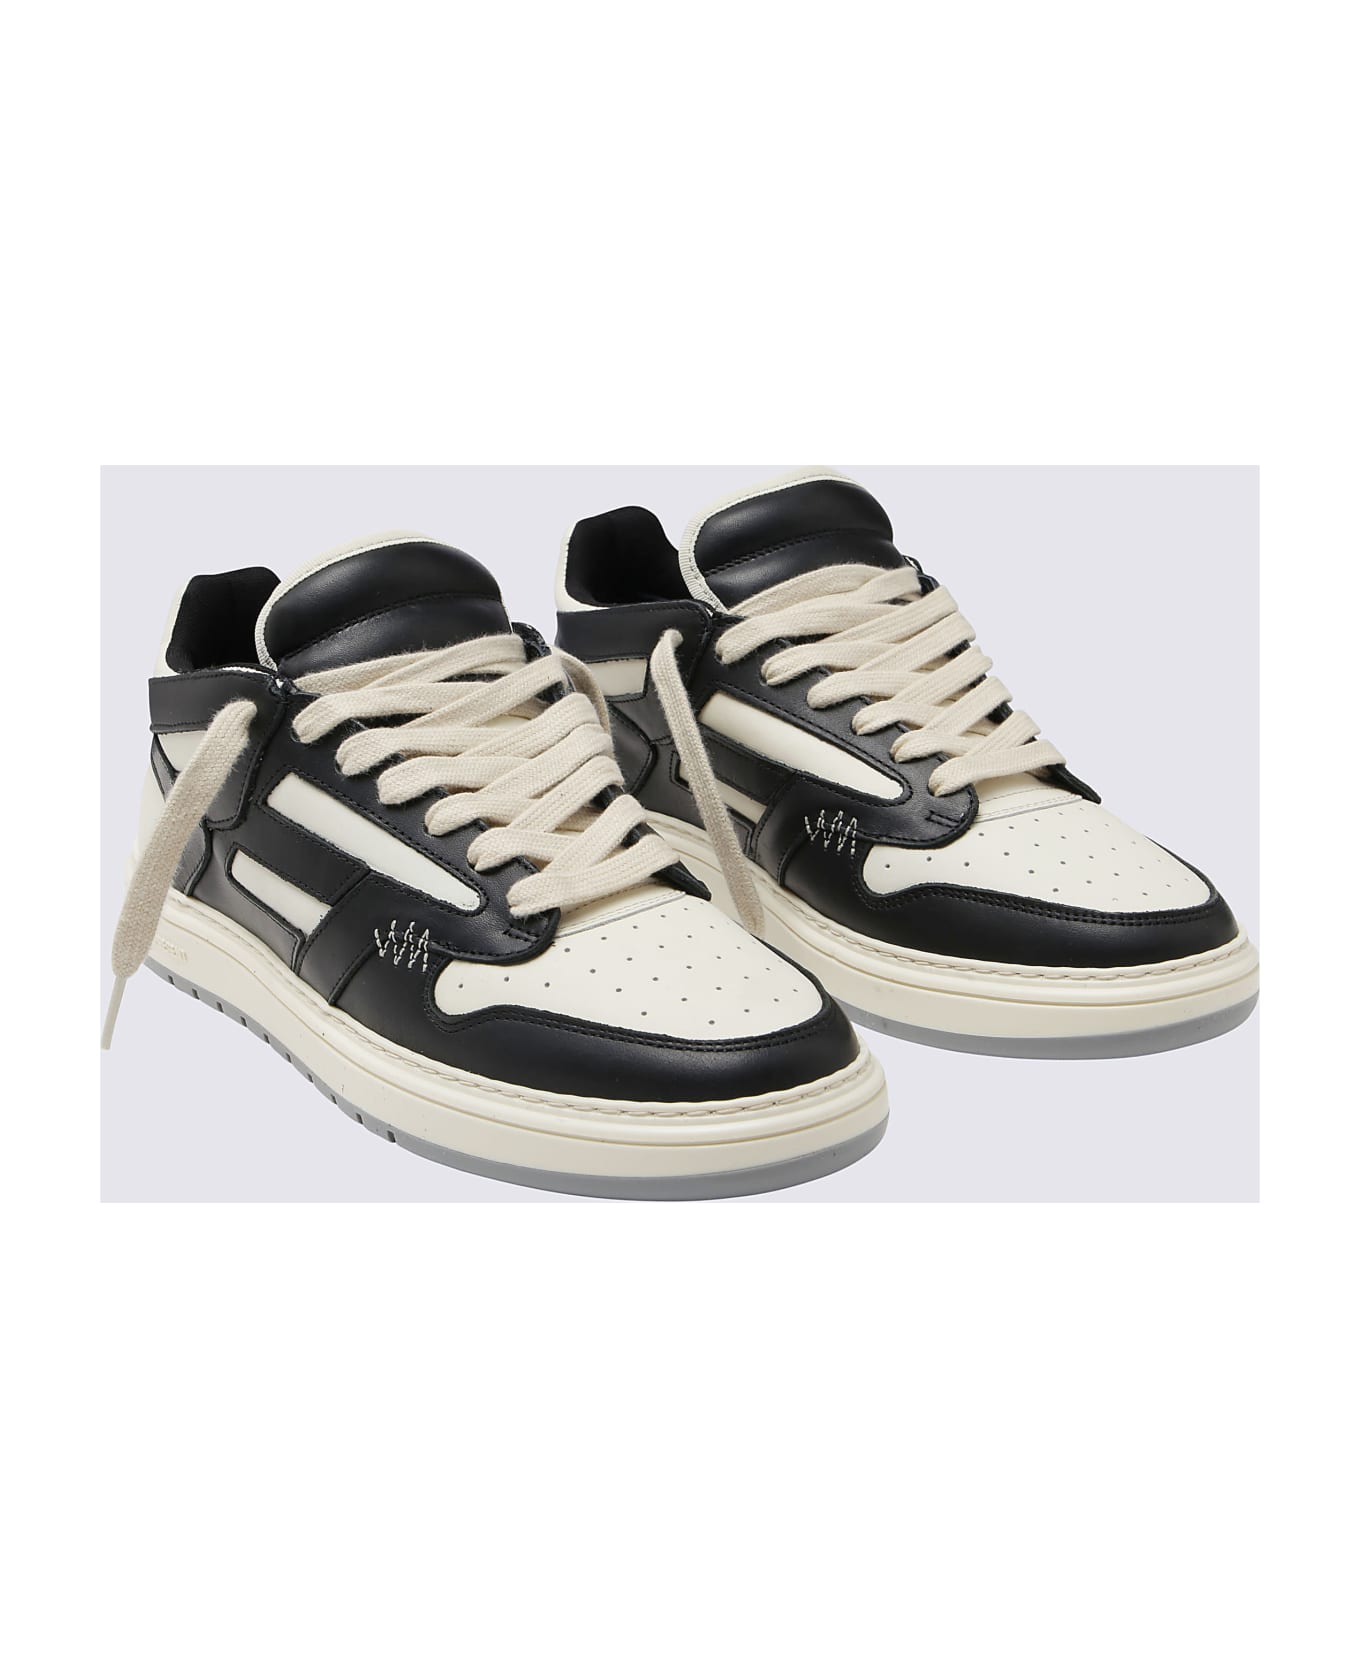 REPRESENT White And Black Leather Reptor Low Panelled Sneakers - White スニーカー